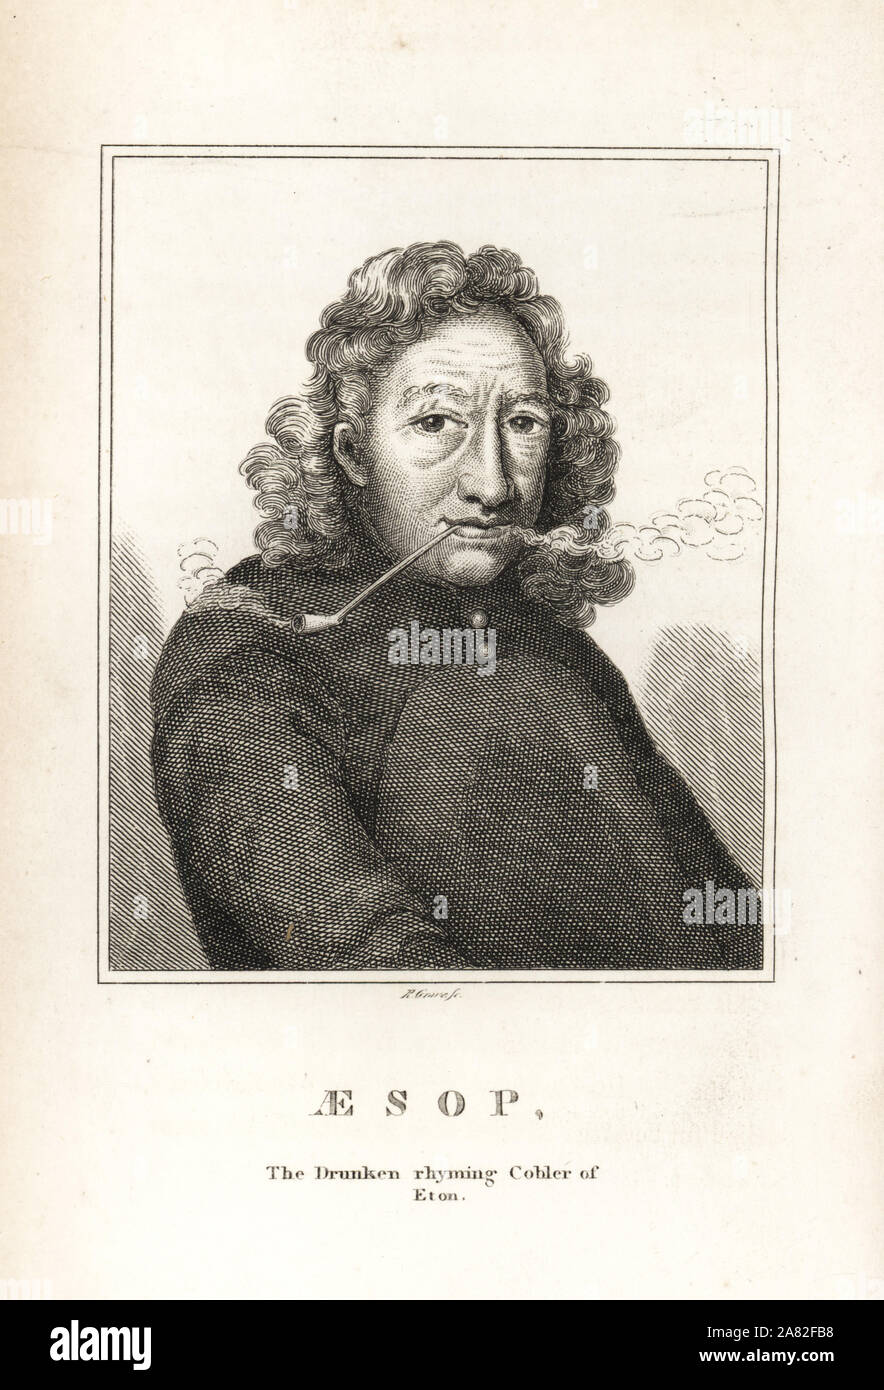 Aesop, the drunken rhyming cobbler of Eton, 17th century. Engraving by R. Grave from James Caulfield's Portraits, Memoirs and Characters of Remarkable Persons, London, 1819. Stock Photo